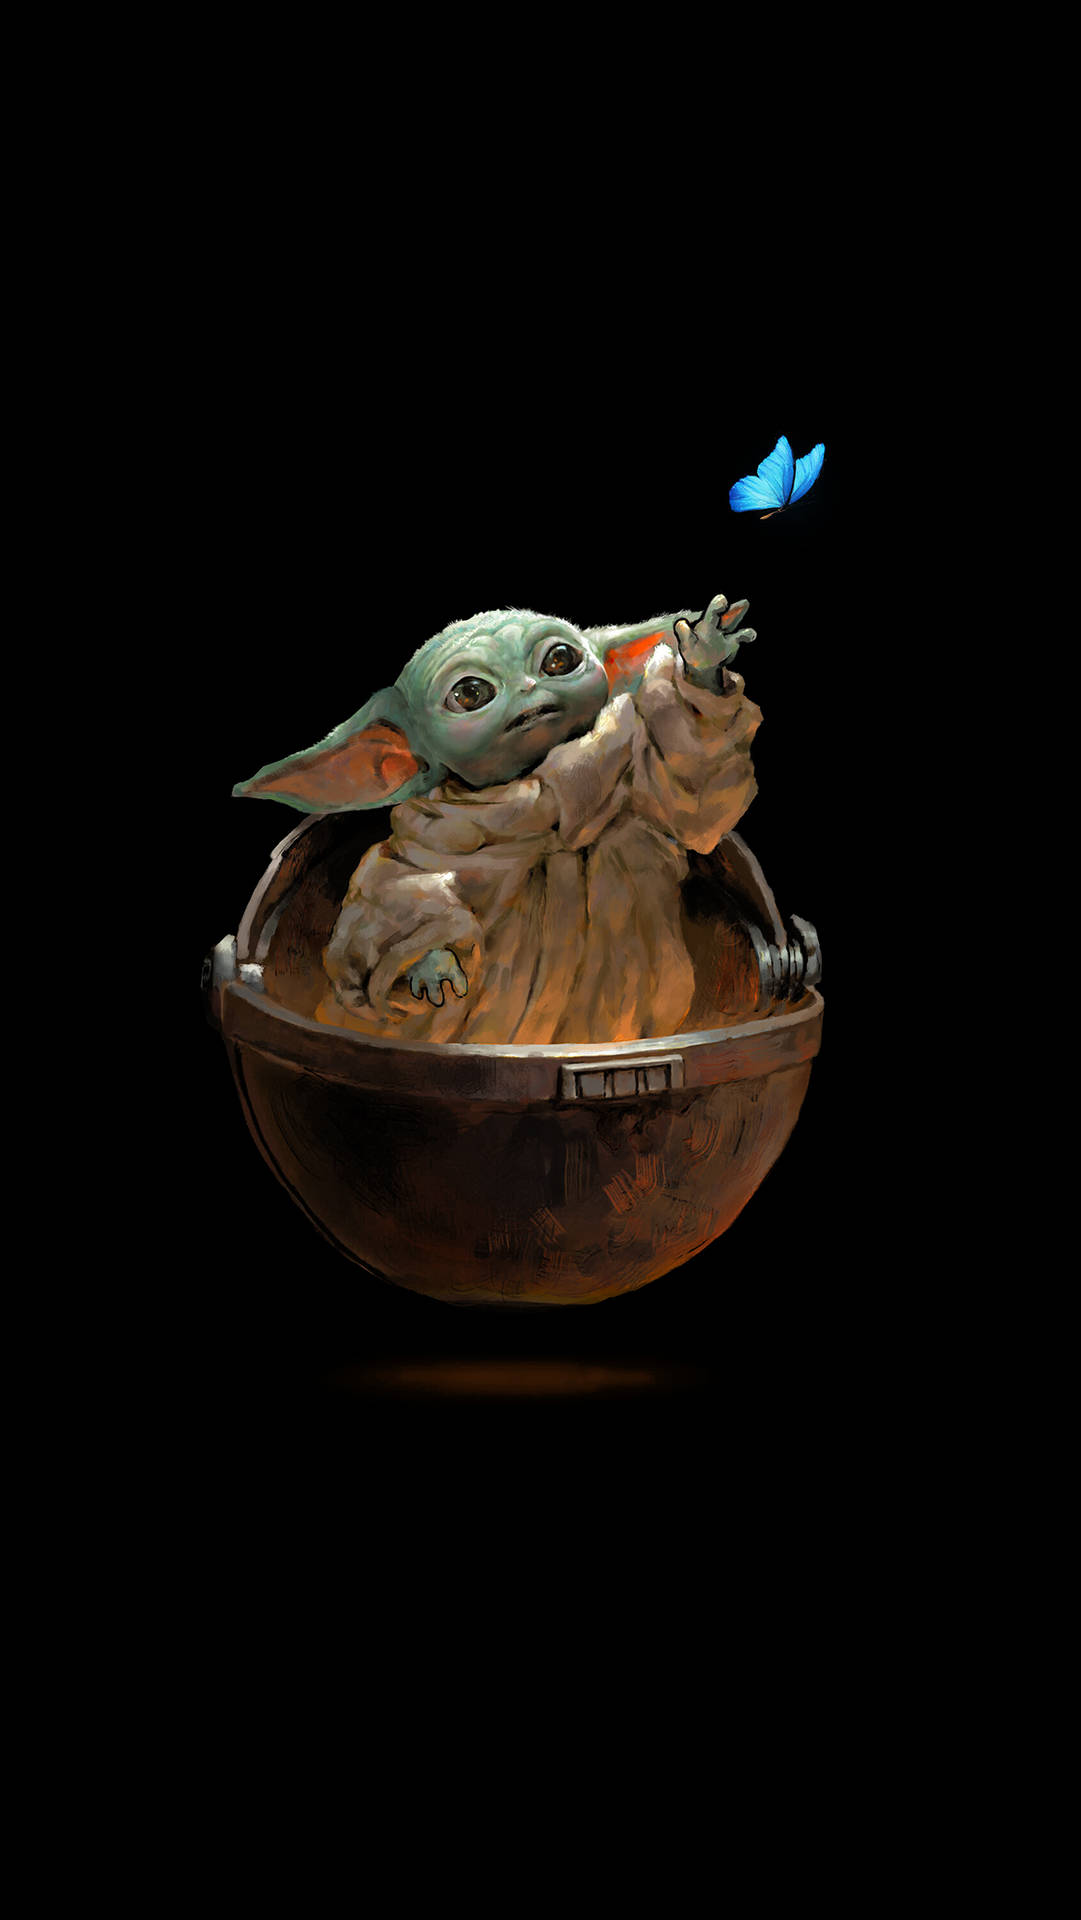 Yoda In Bowl-shaped Space Craft